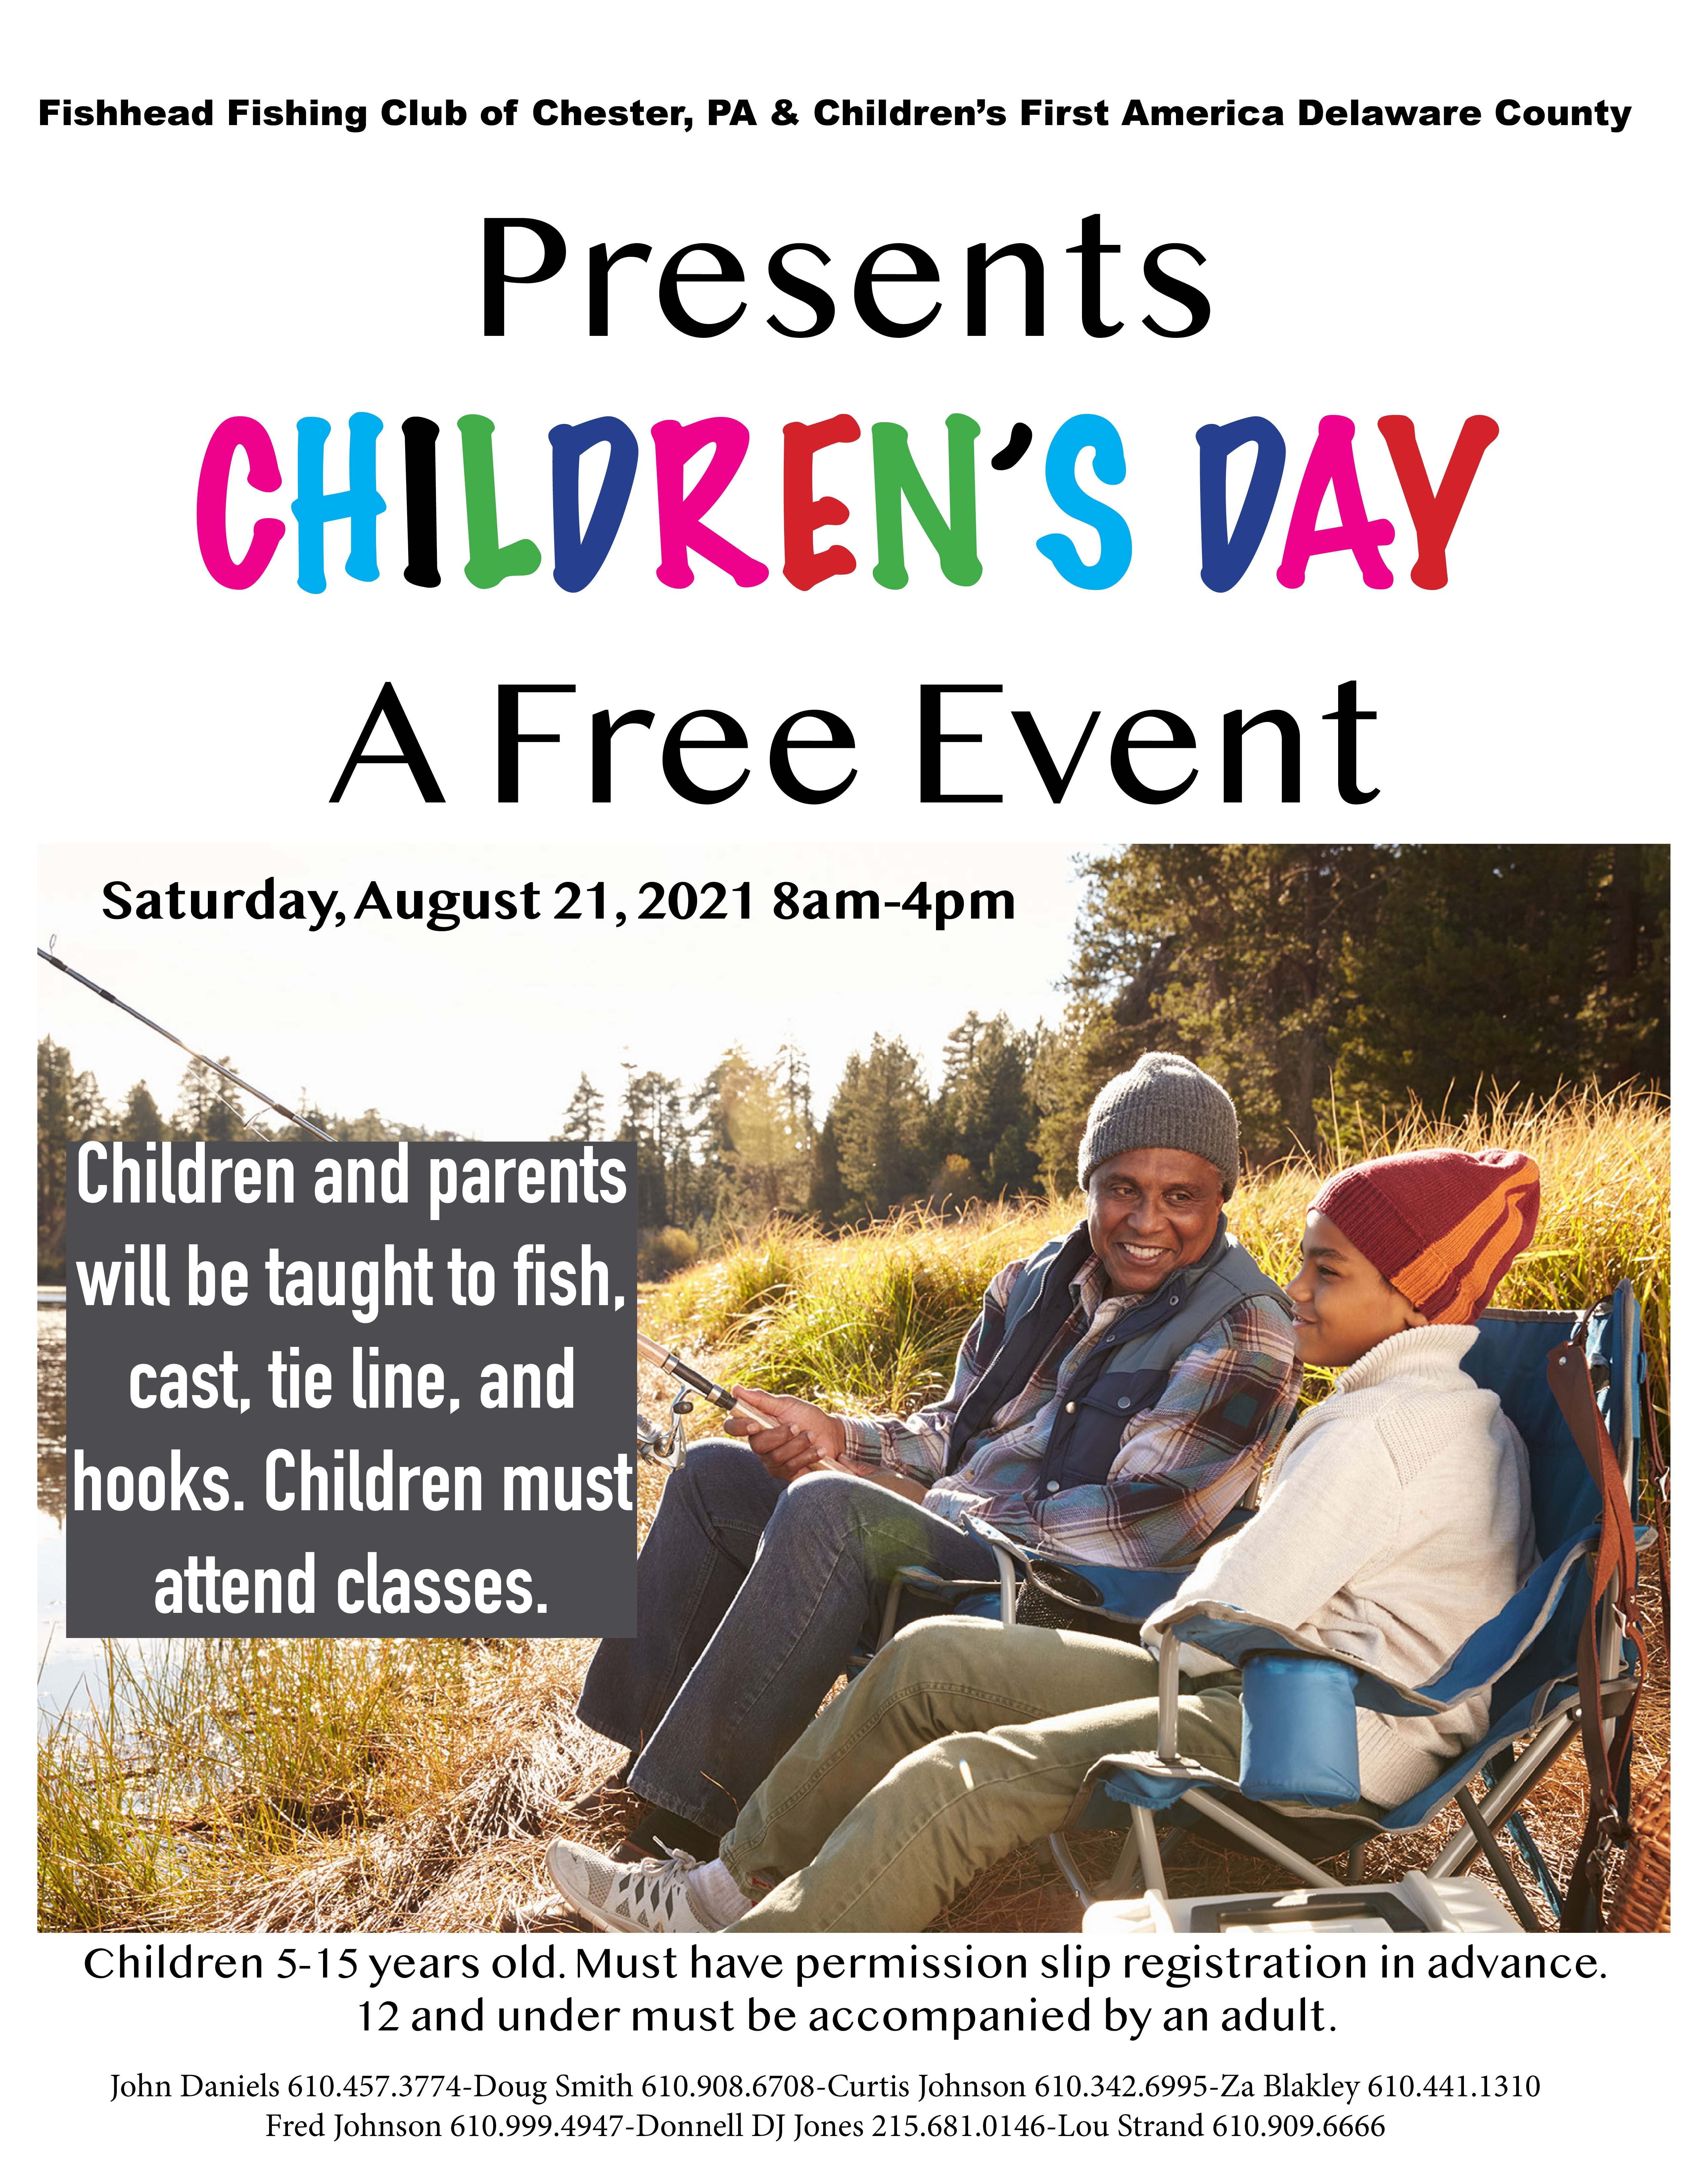 Free Fishing event for children in Chester